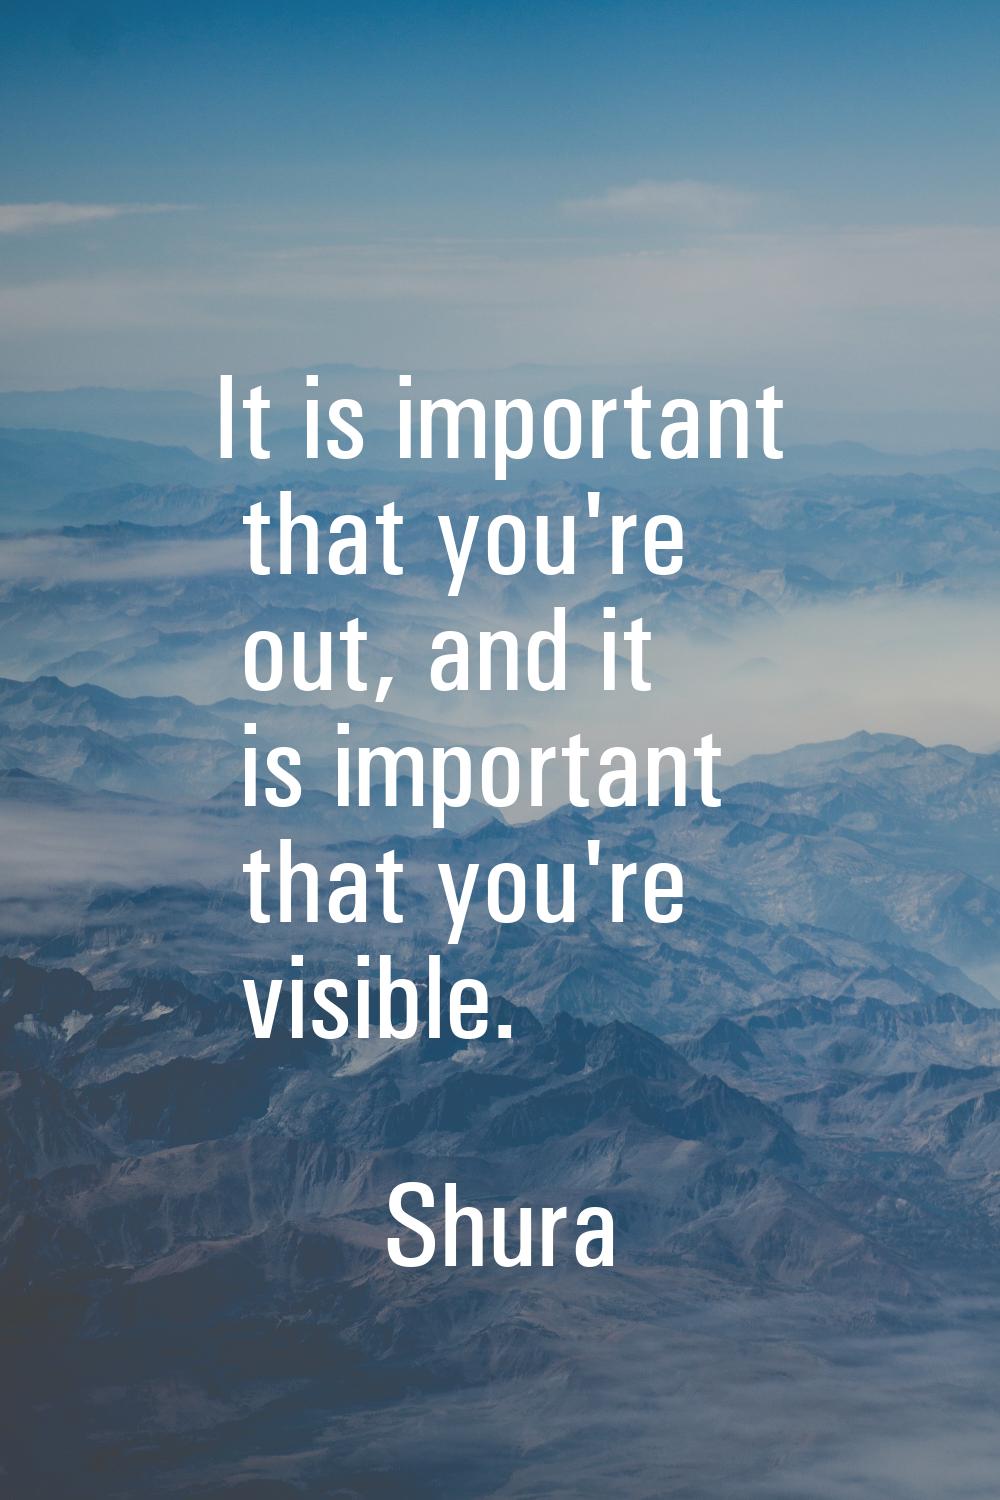 It is important that you're out, and it is important that you're visible.